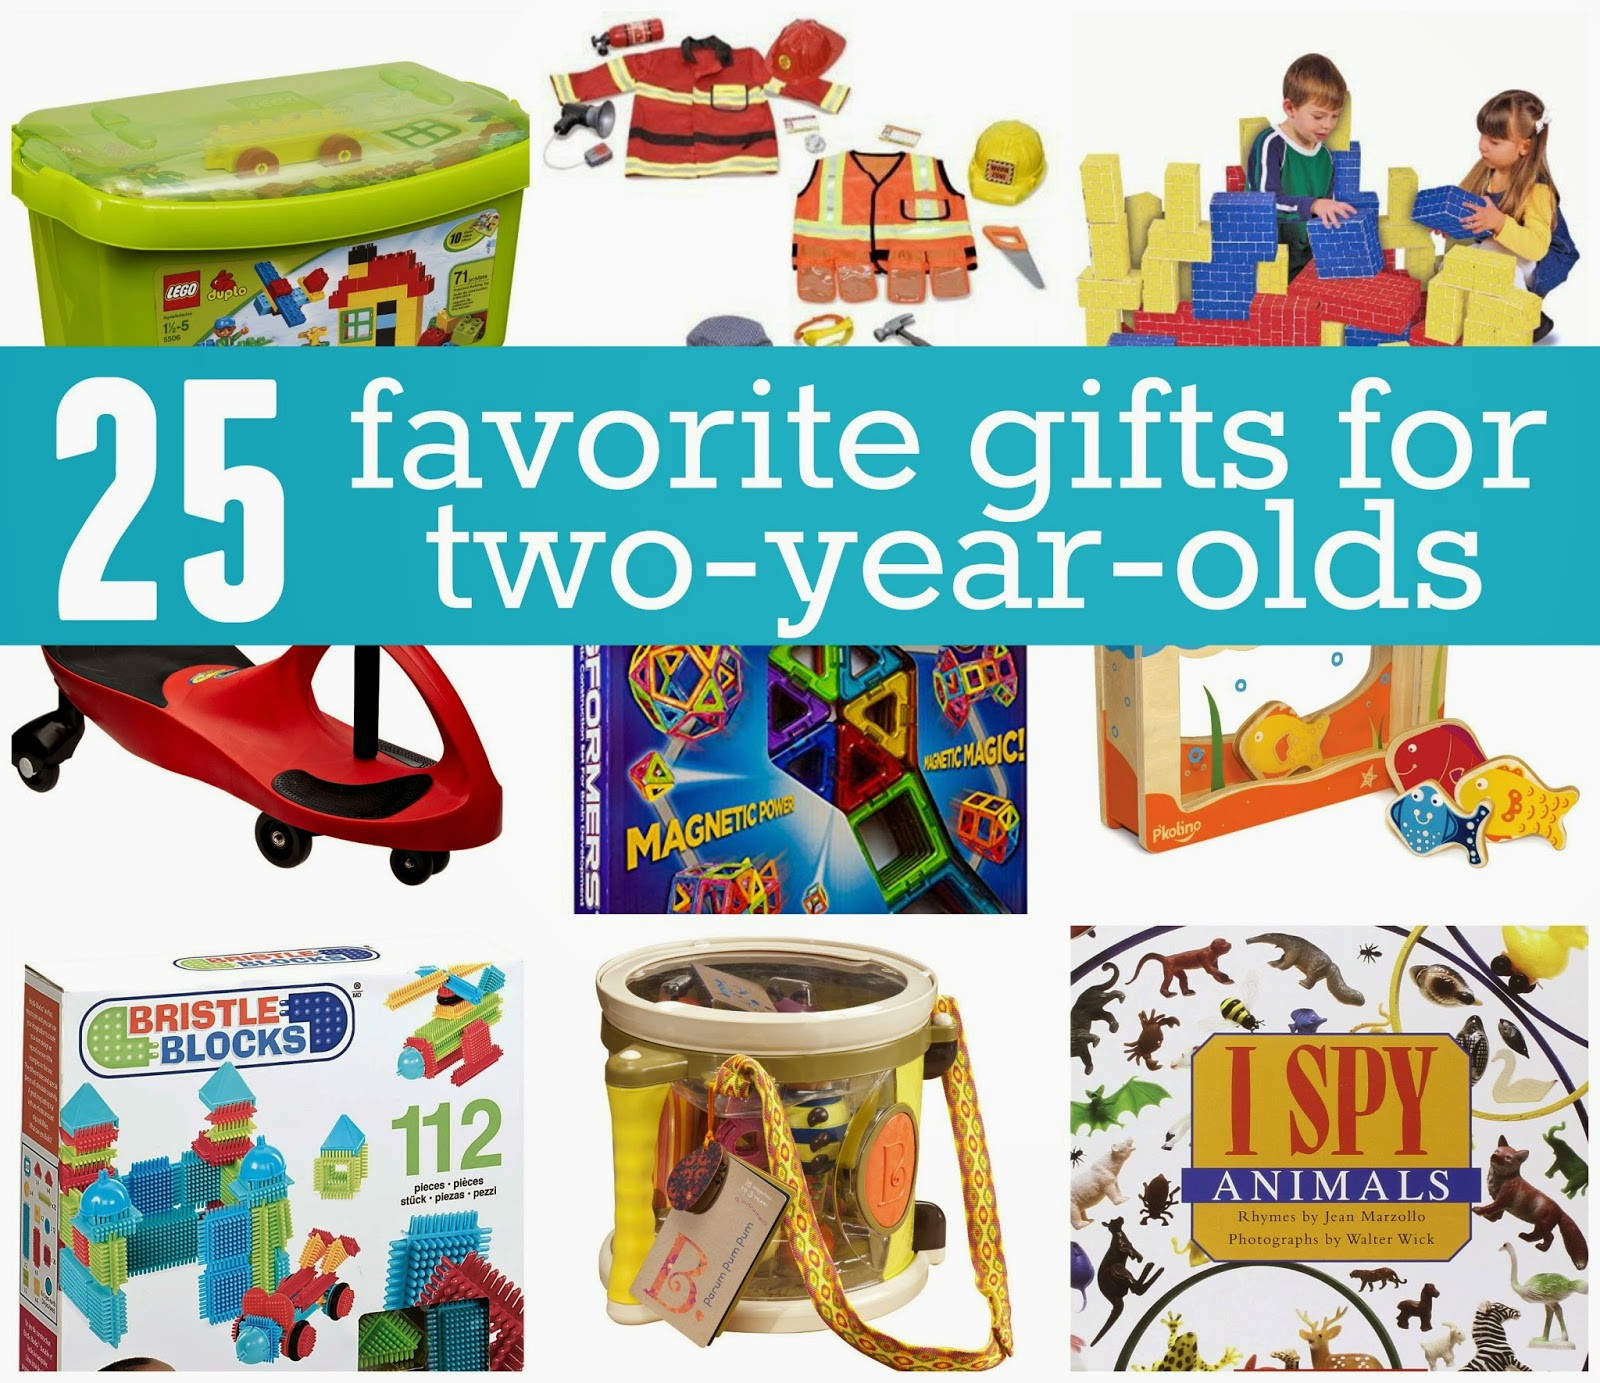 Birthday Gift Ideas For 2 Year Old Boy
 Toddler Approved Favorite Gifts for 2 Year Olds